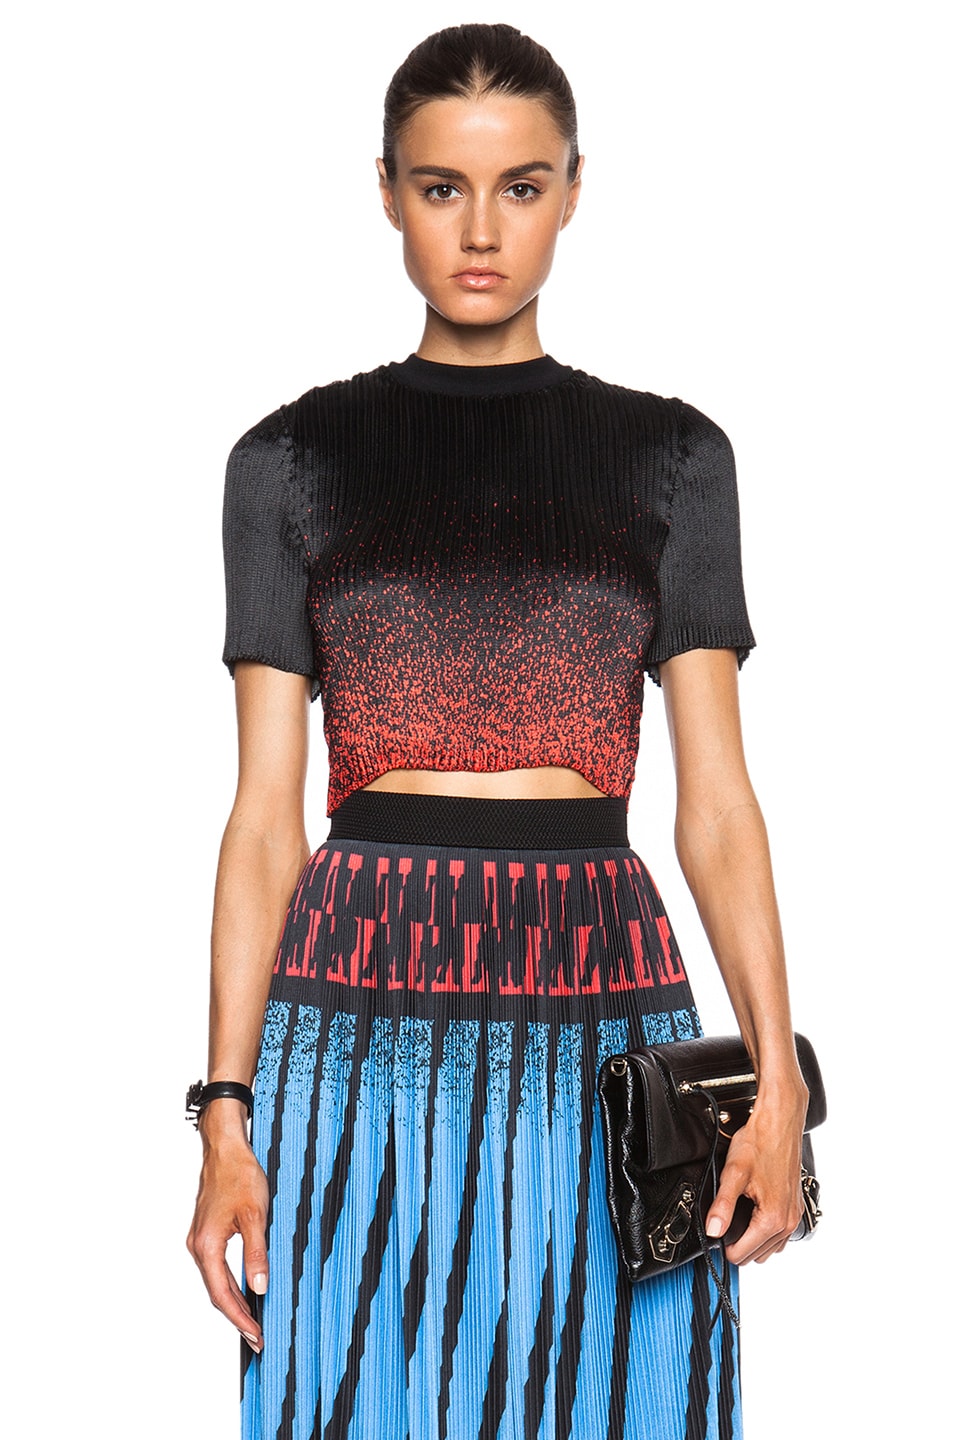 Alexander Wang Ribbed Micro Pleat Crop Top in Lacquer Spray | FWRD